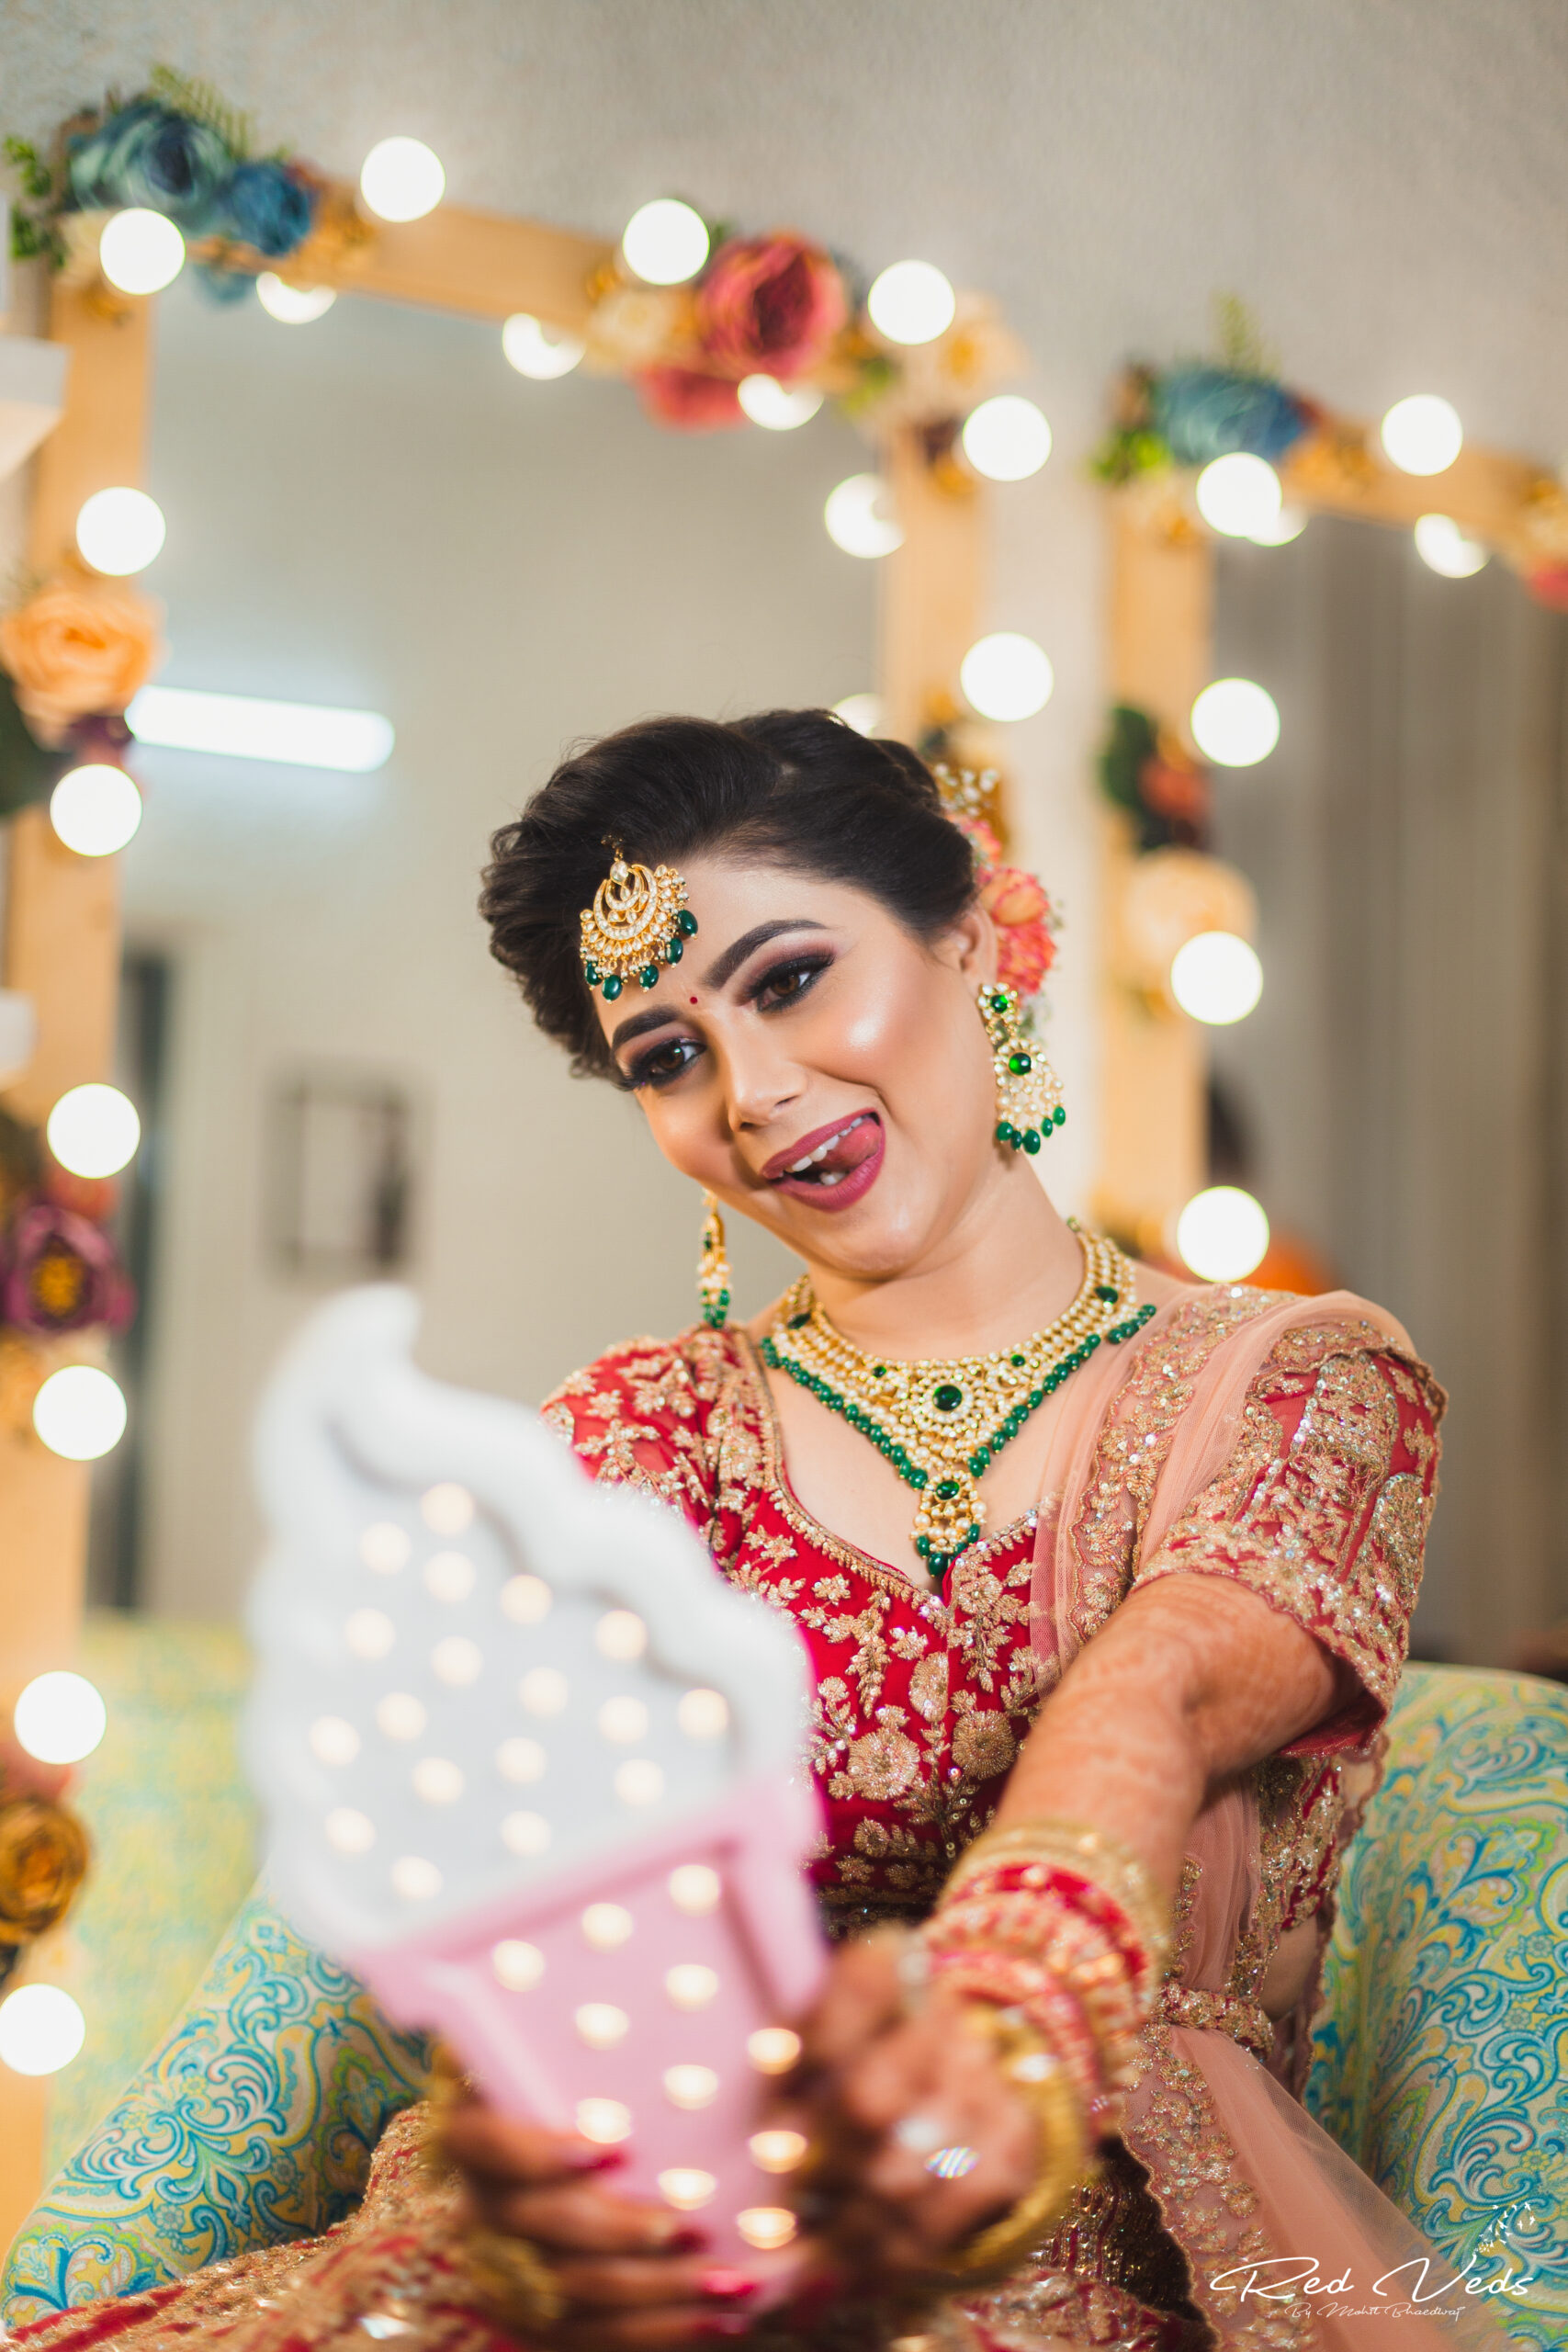 5 Poses Every Hindu Bride Should Try For Her Wedding Photography - PIP  Broadcast